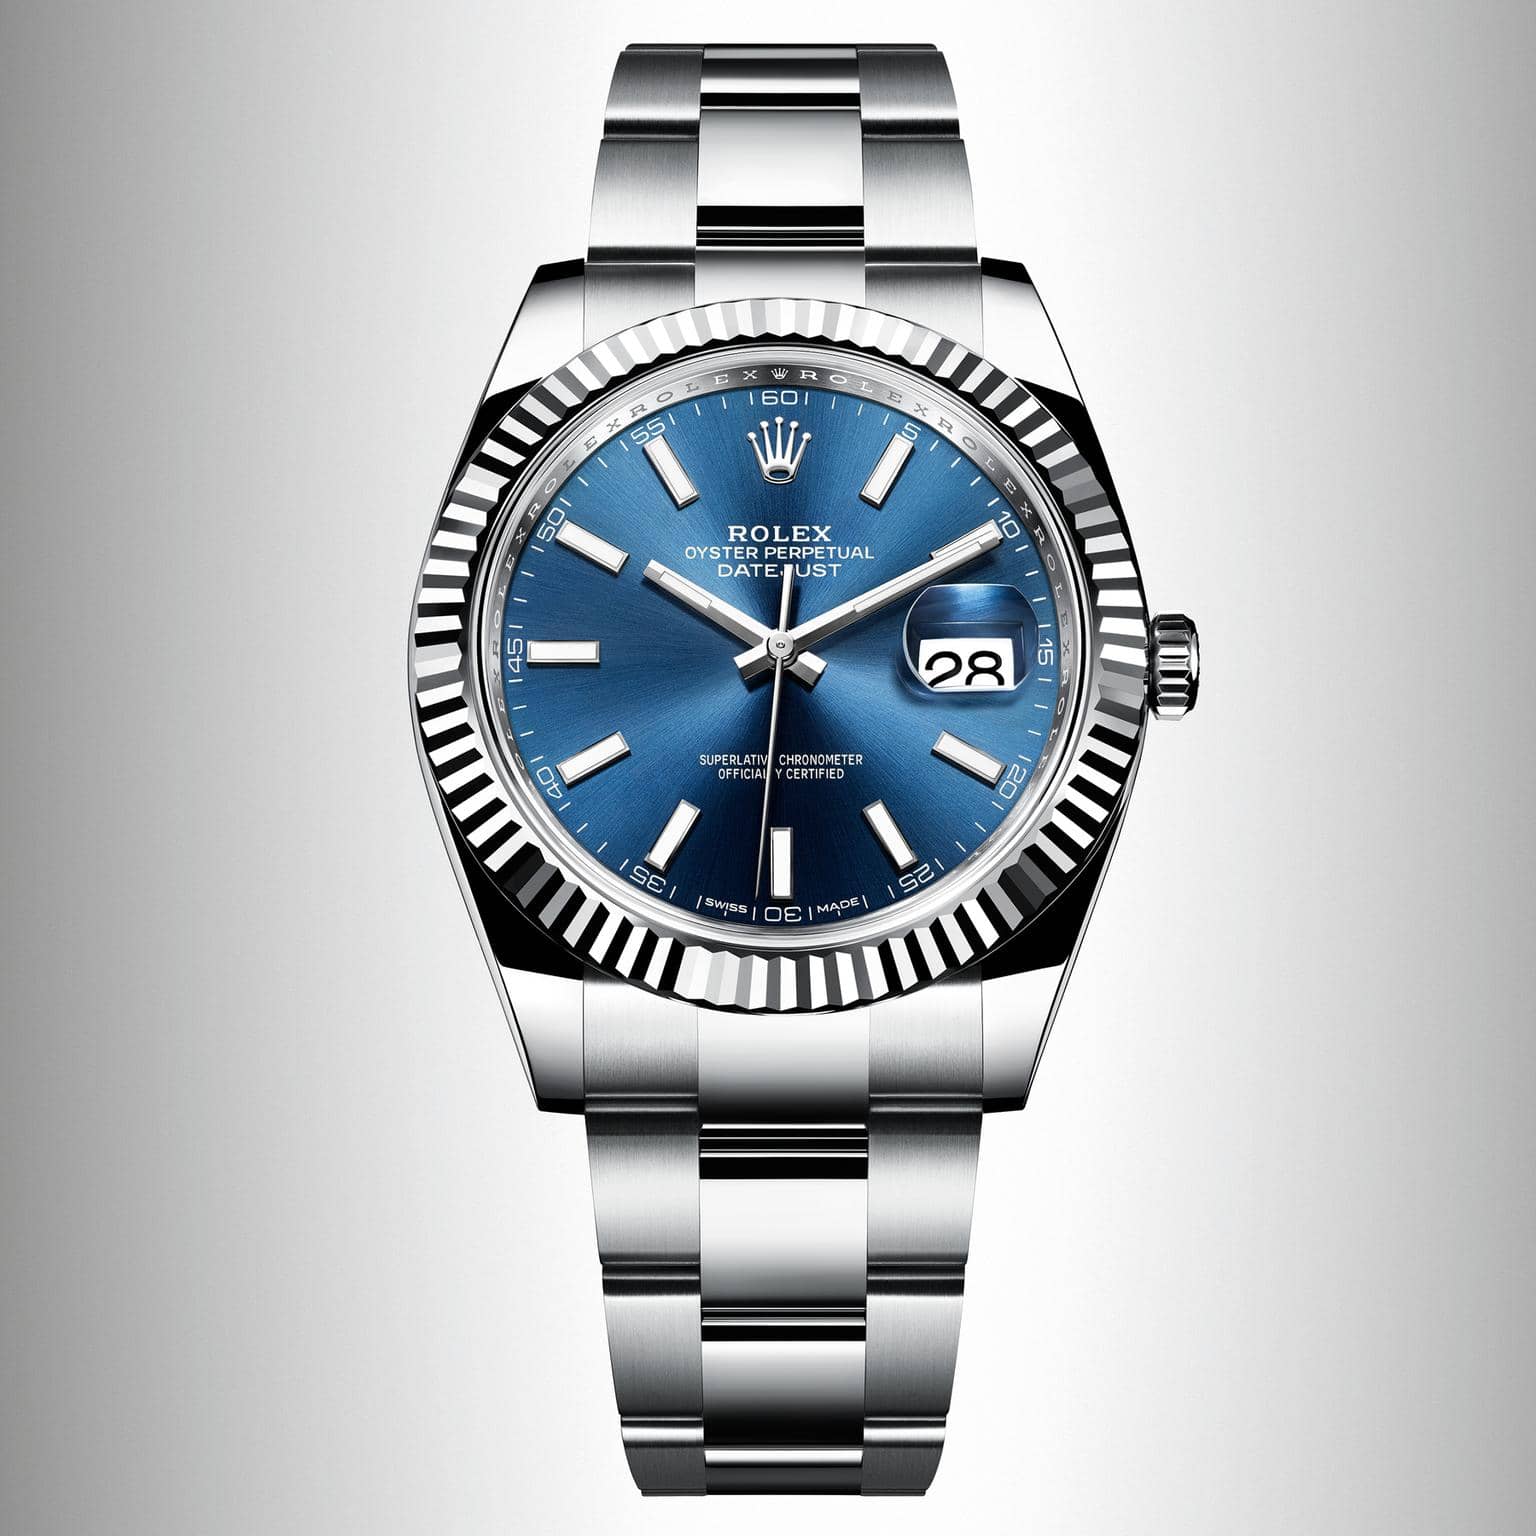 Why The Rolex Datejust 41 Is The 